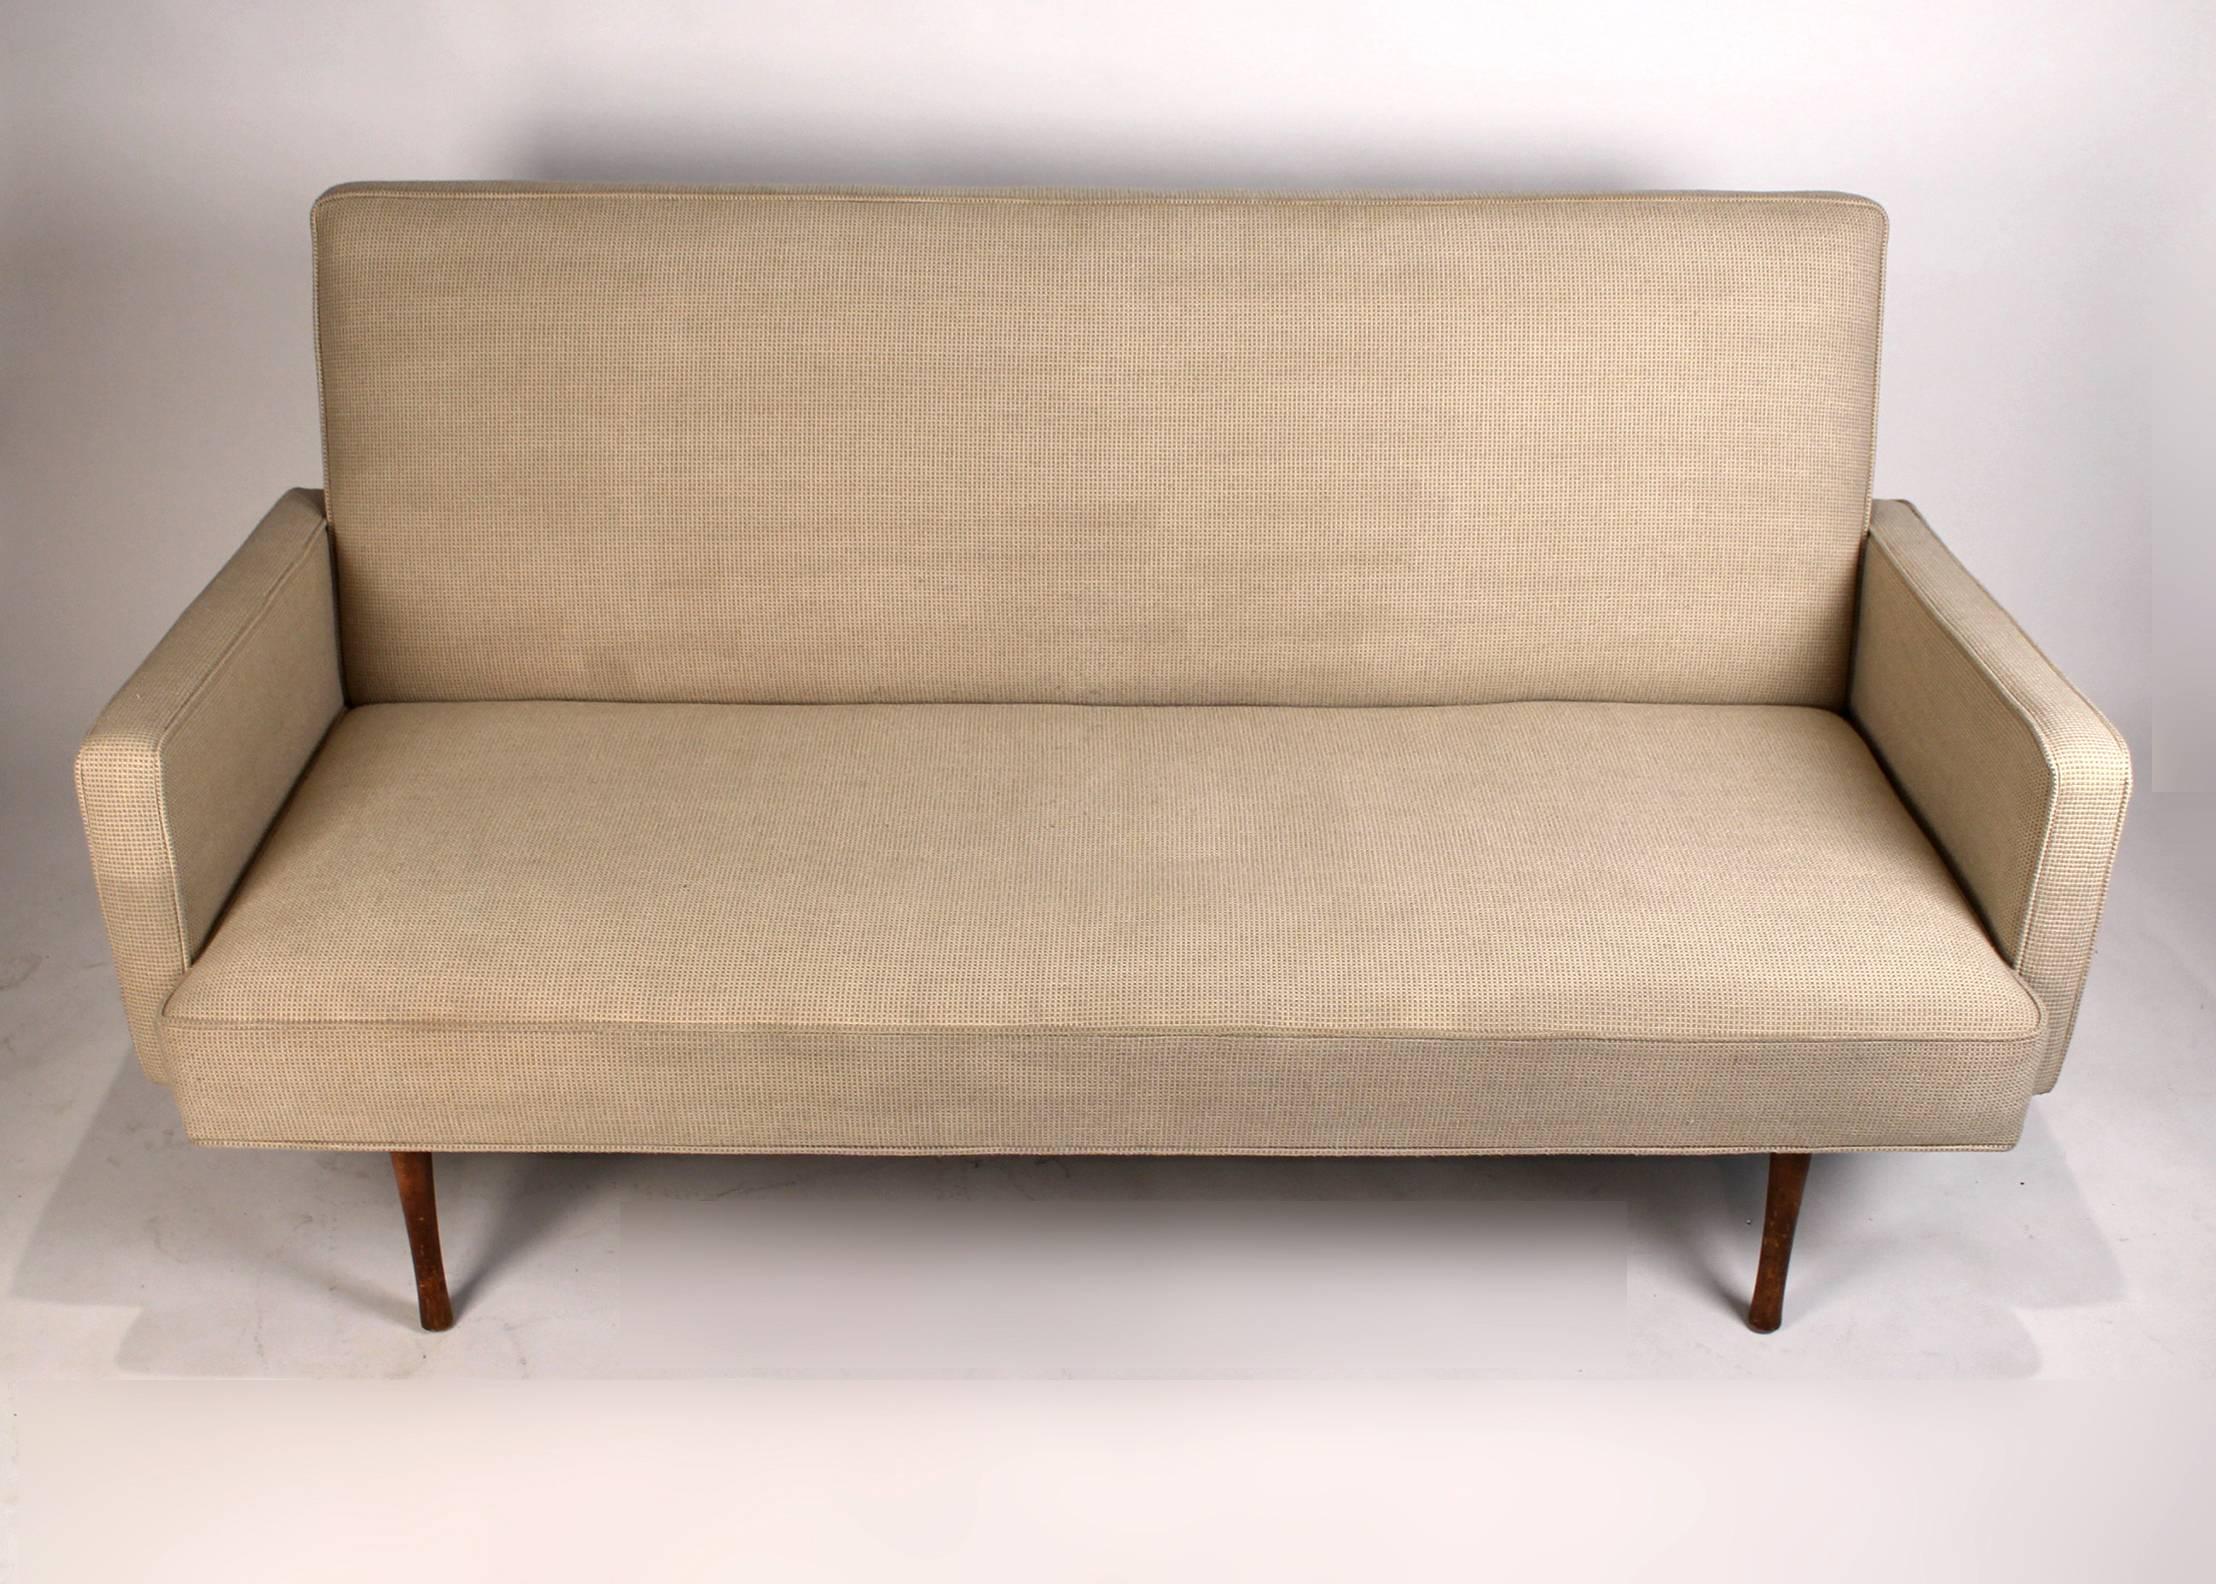 Early Planner Group sofa designed by Paul McCobb. This design is not common and seldom found. Original upholstery and finish intact.